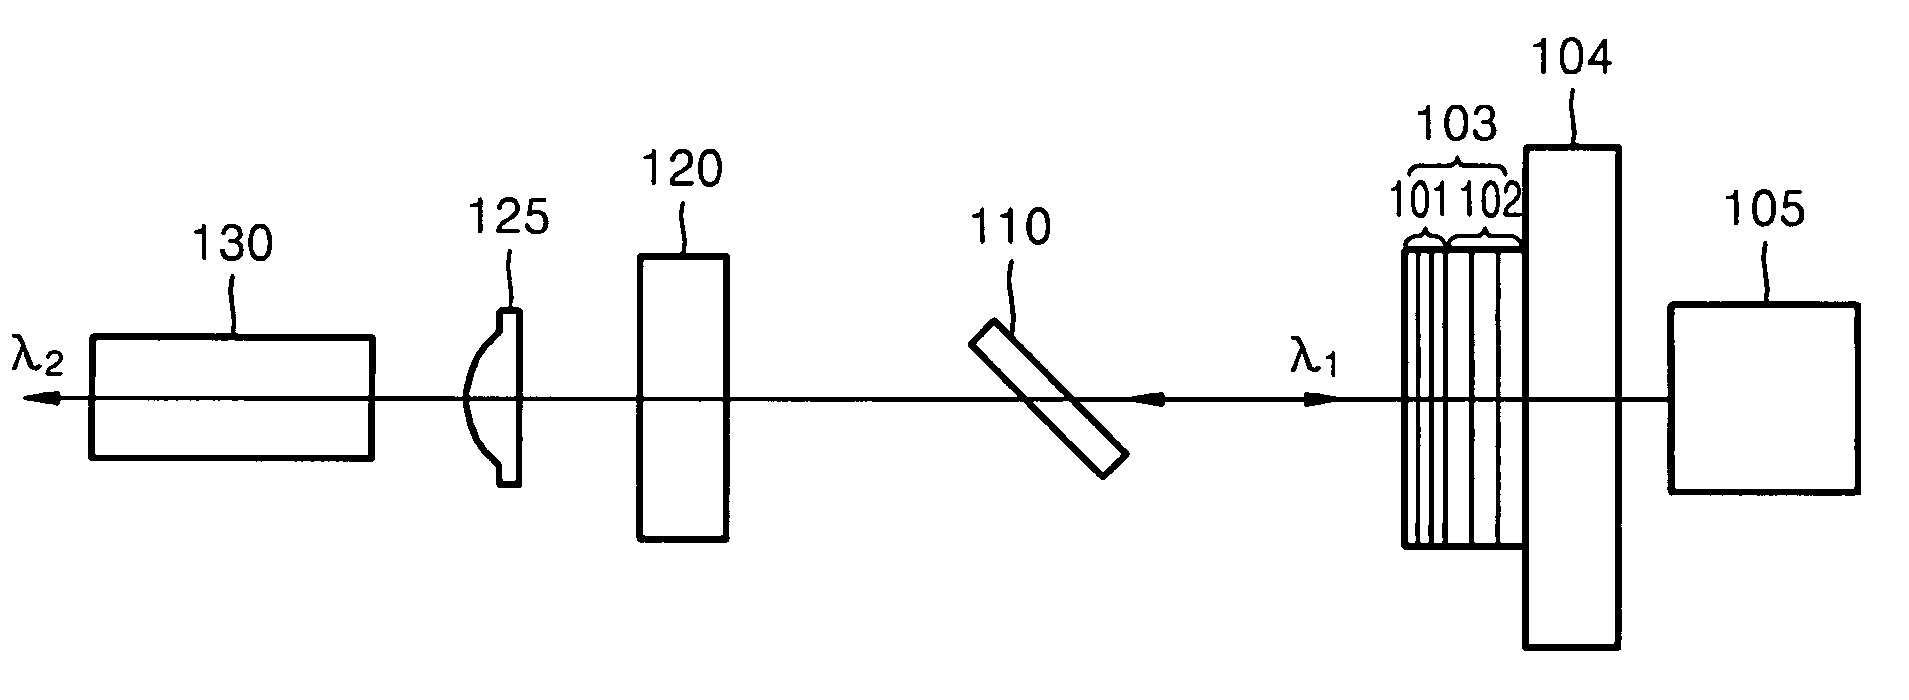 Laser module allowing direct light modulation and laser display employing the same